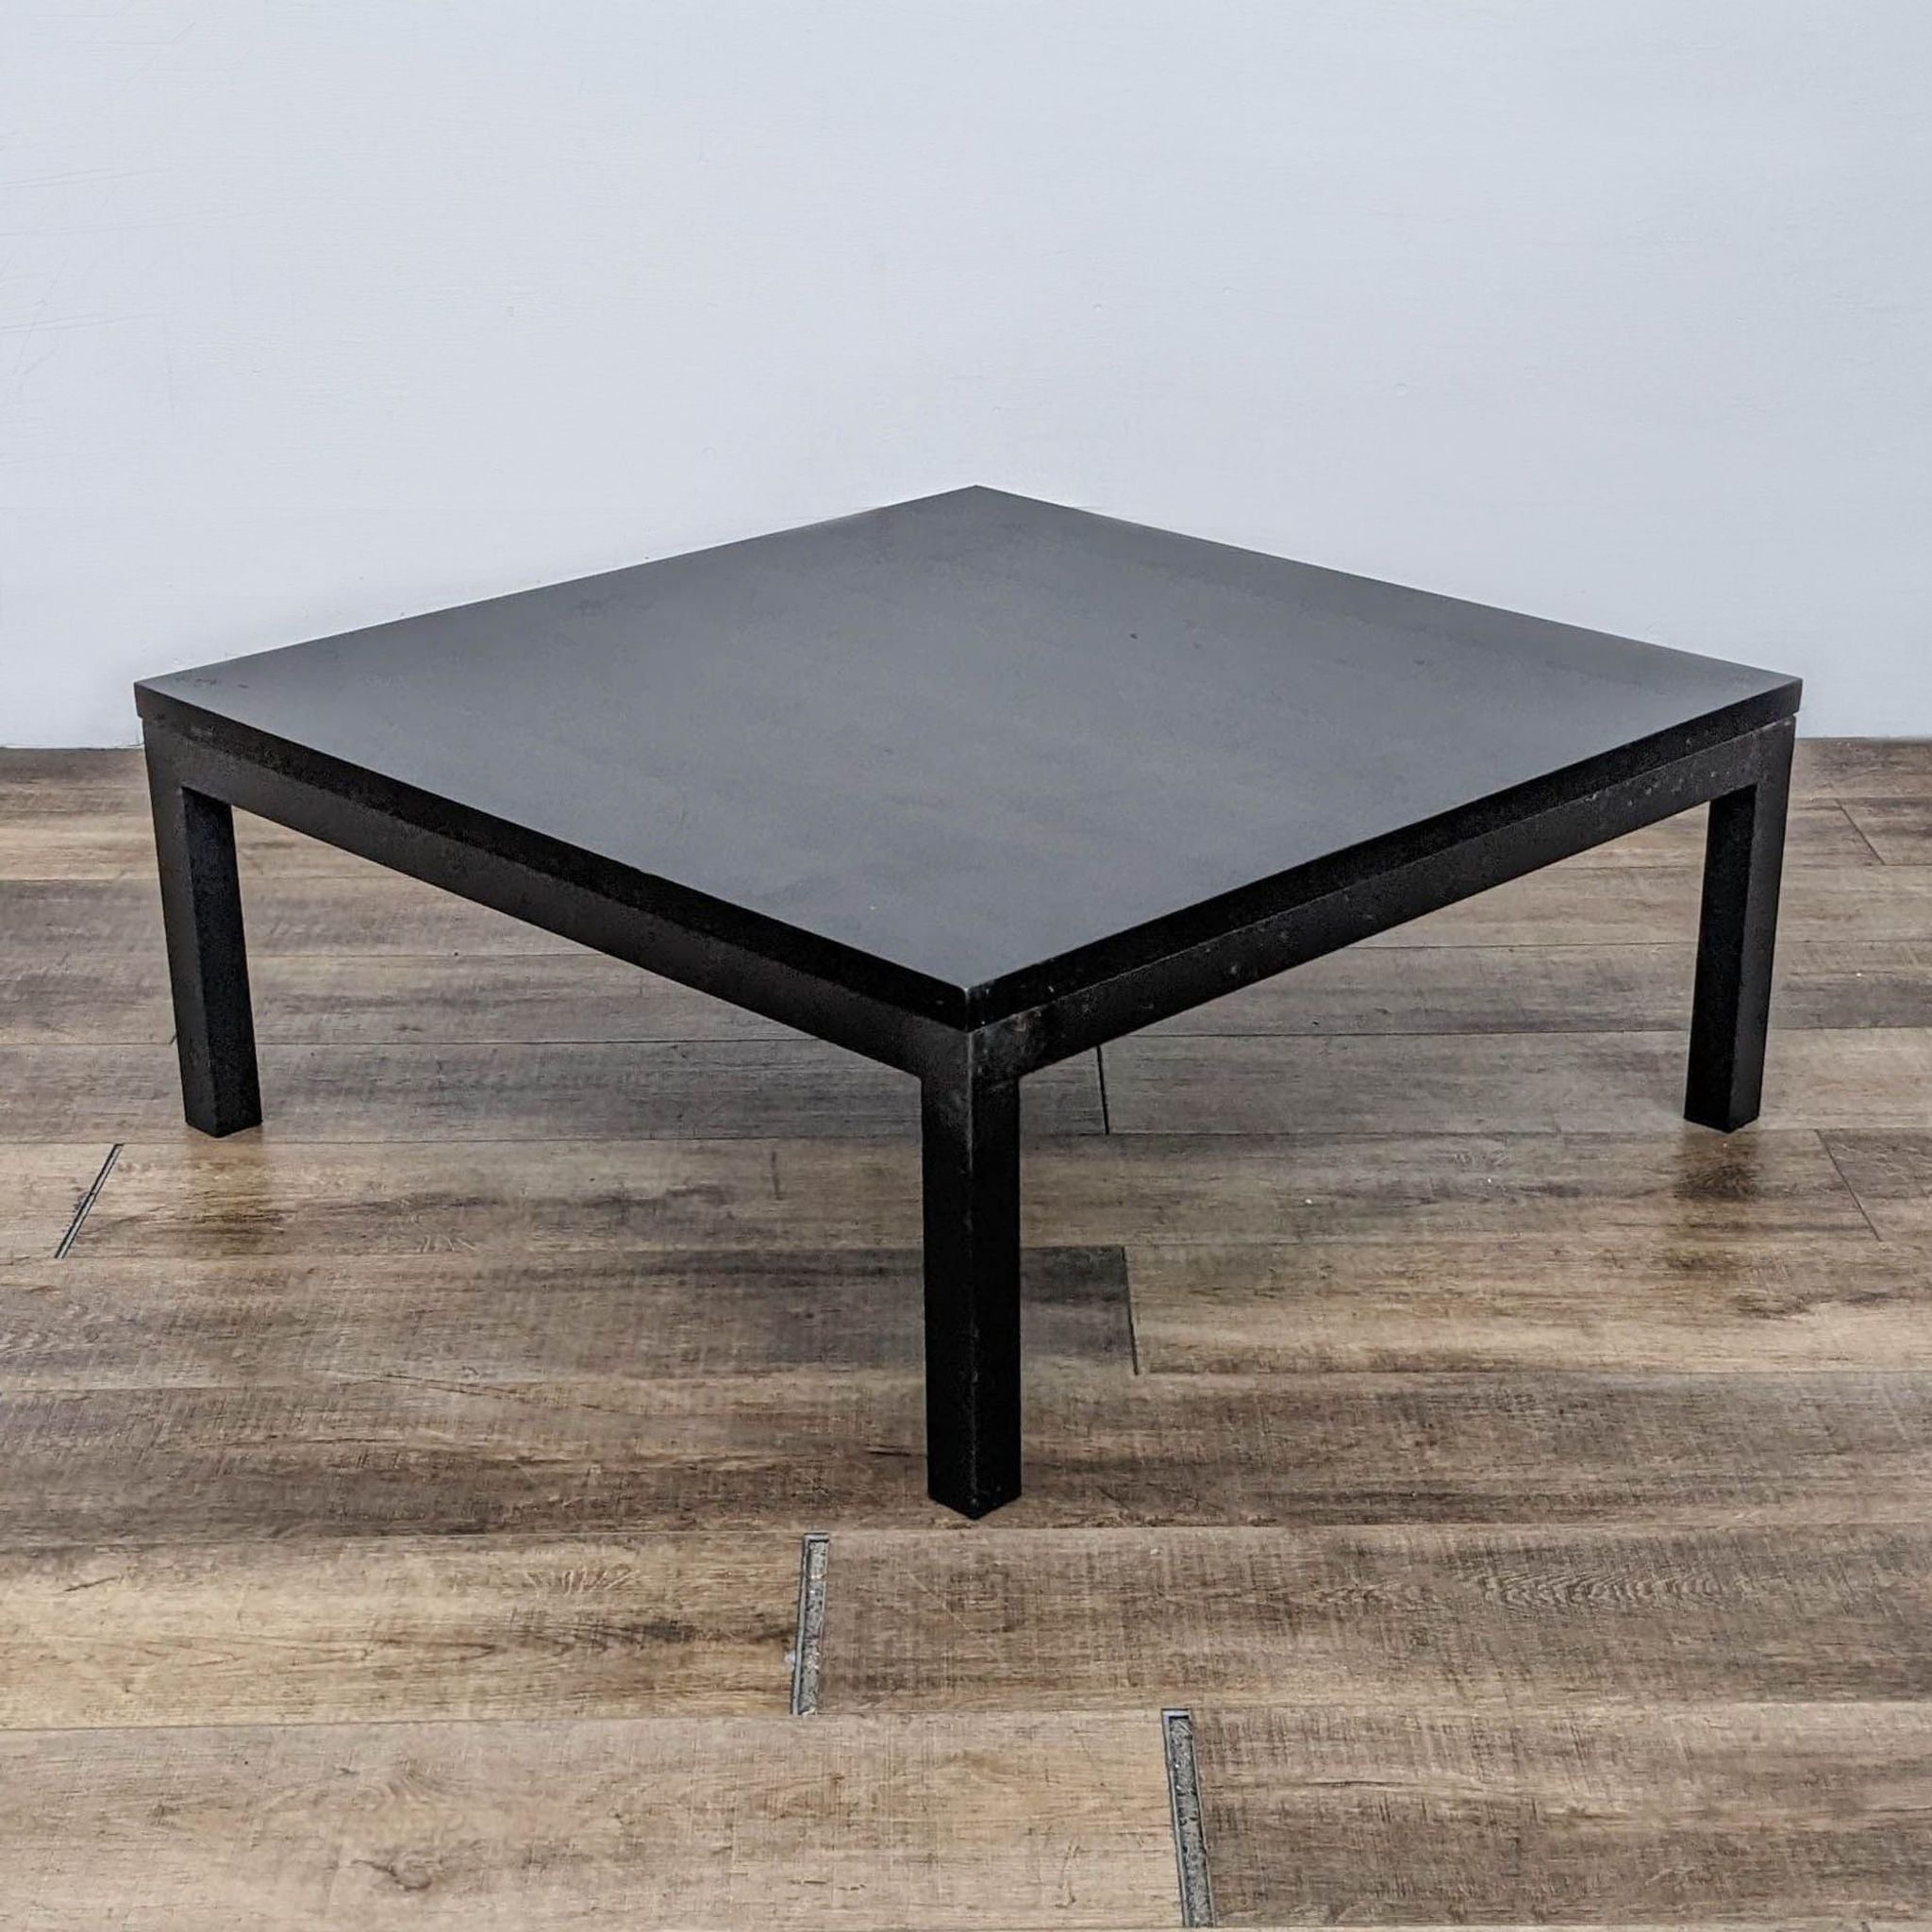 Minimalistic black Parsons coffee table by Room & Board in an interior setting.